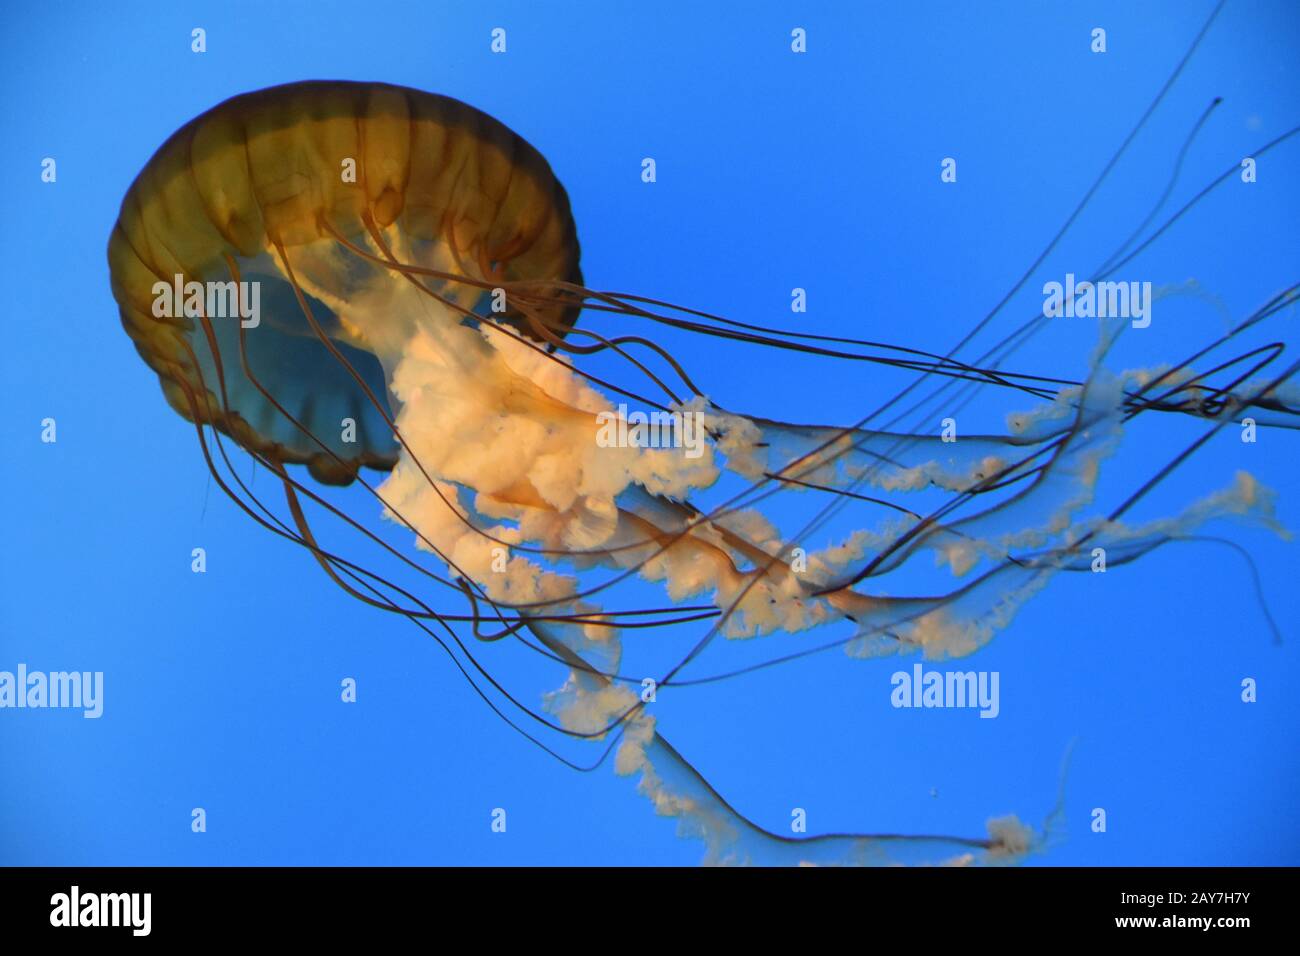 Pacific Sea Nettle Jellyfish Banque D'Images